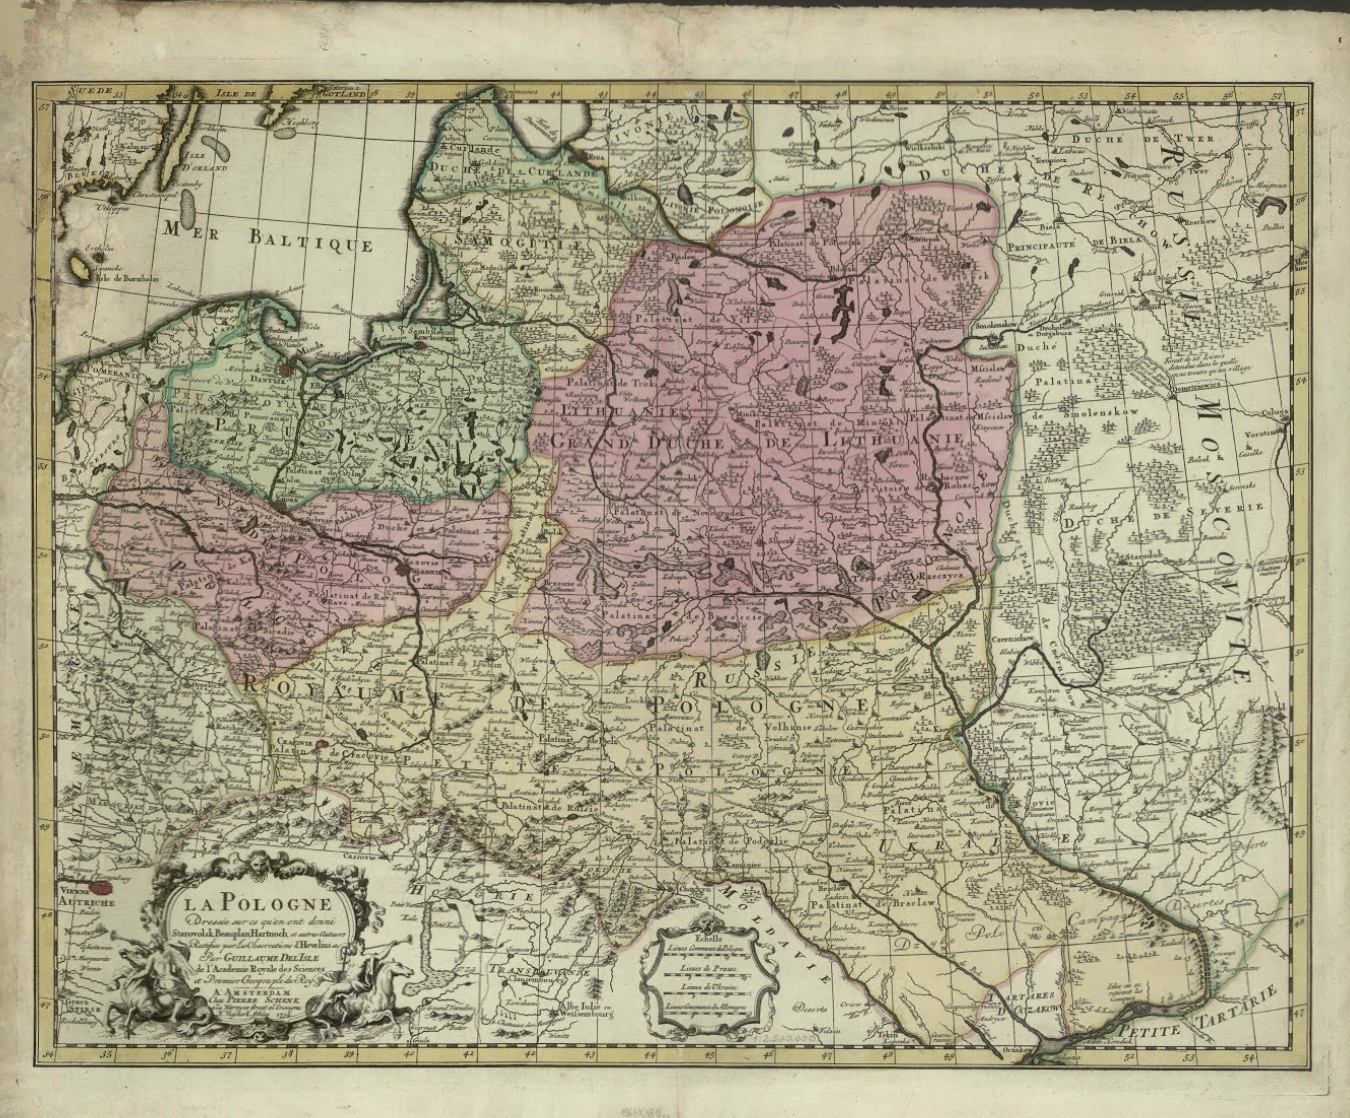 A map of the Polish-Lithuanian Commonwealth, 1734